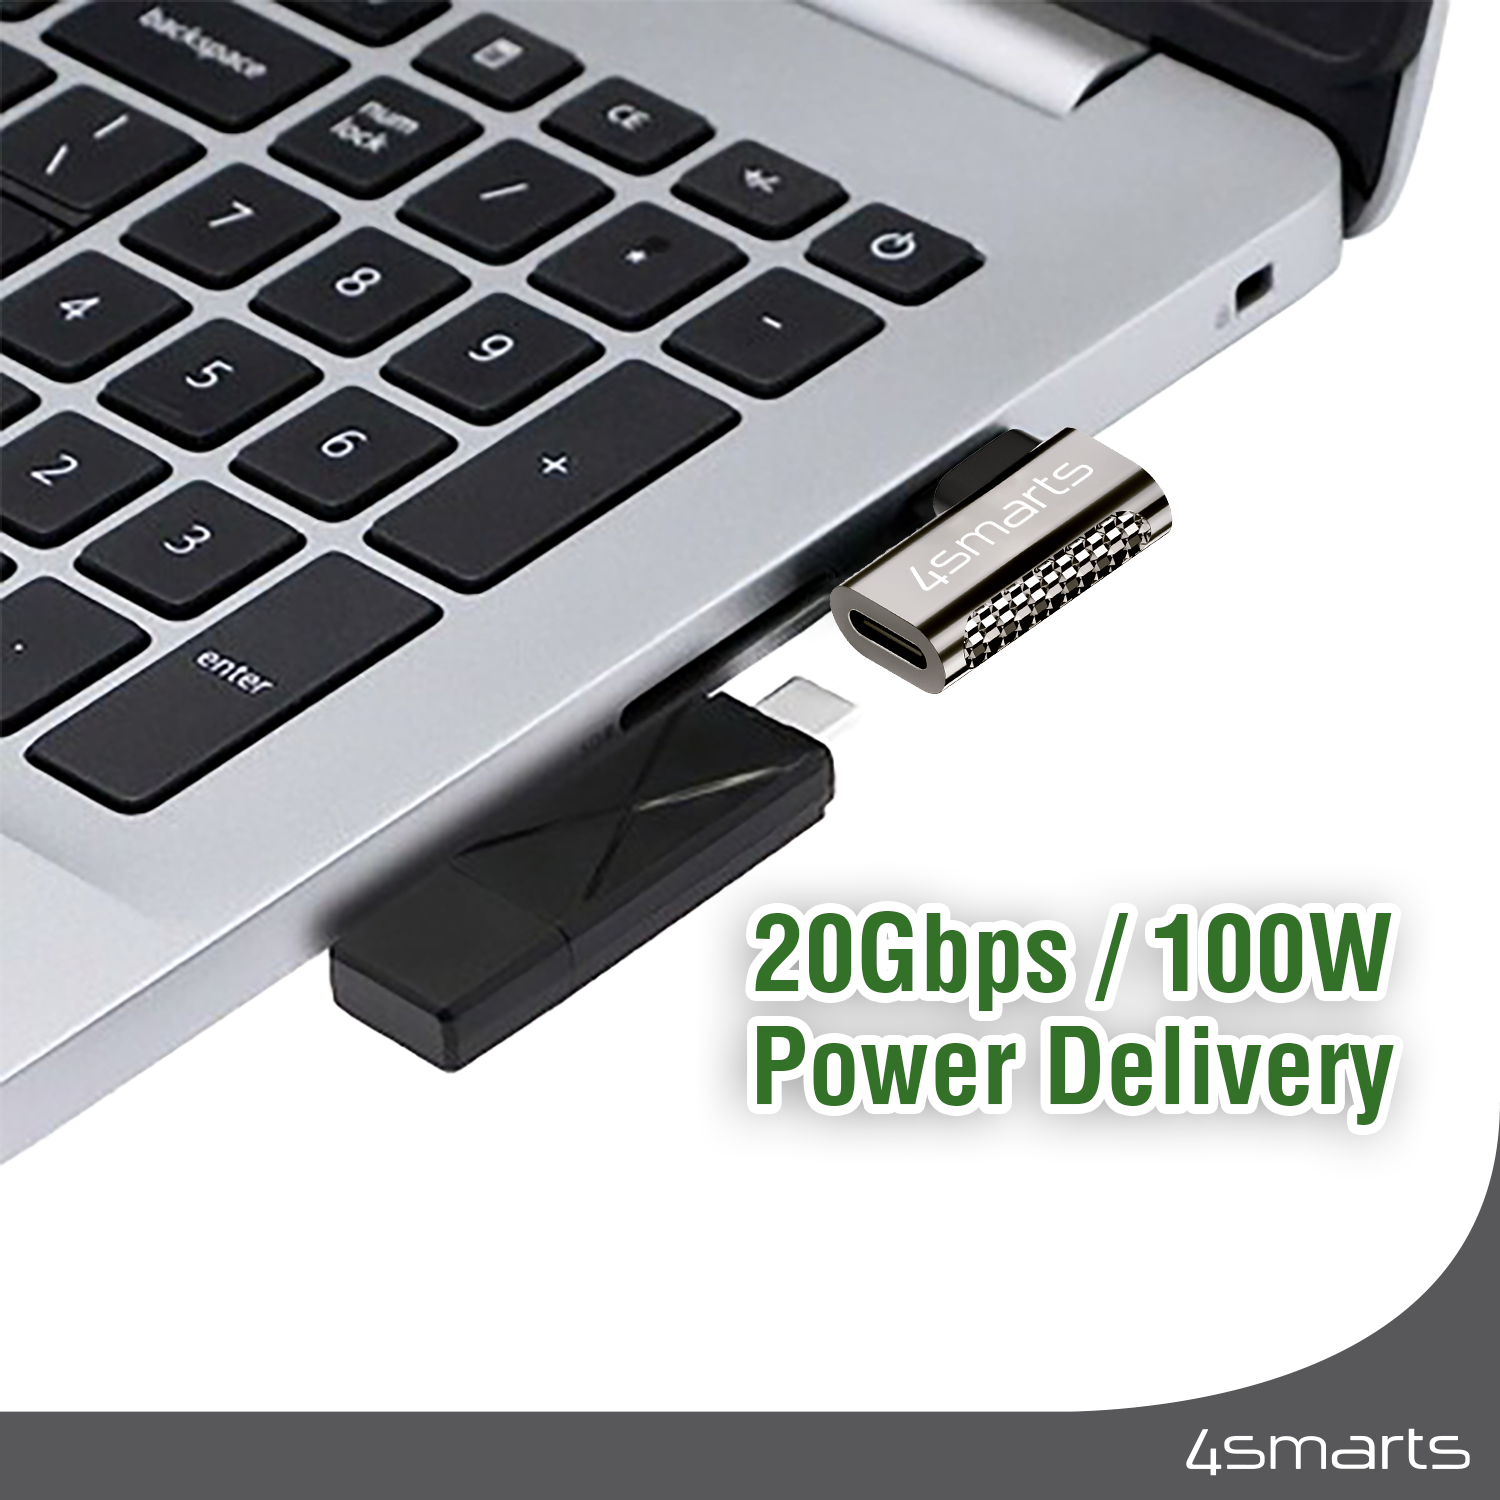 The 4smarts USB OTG adapter supports up to 100W.